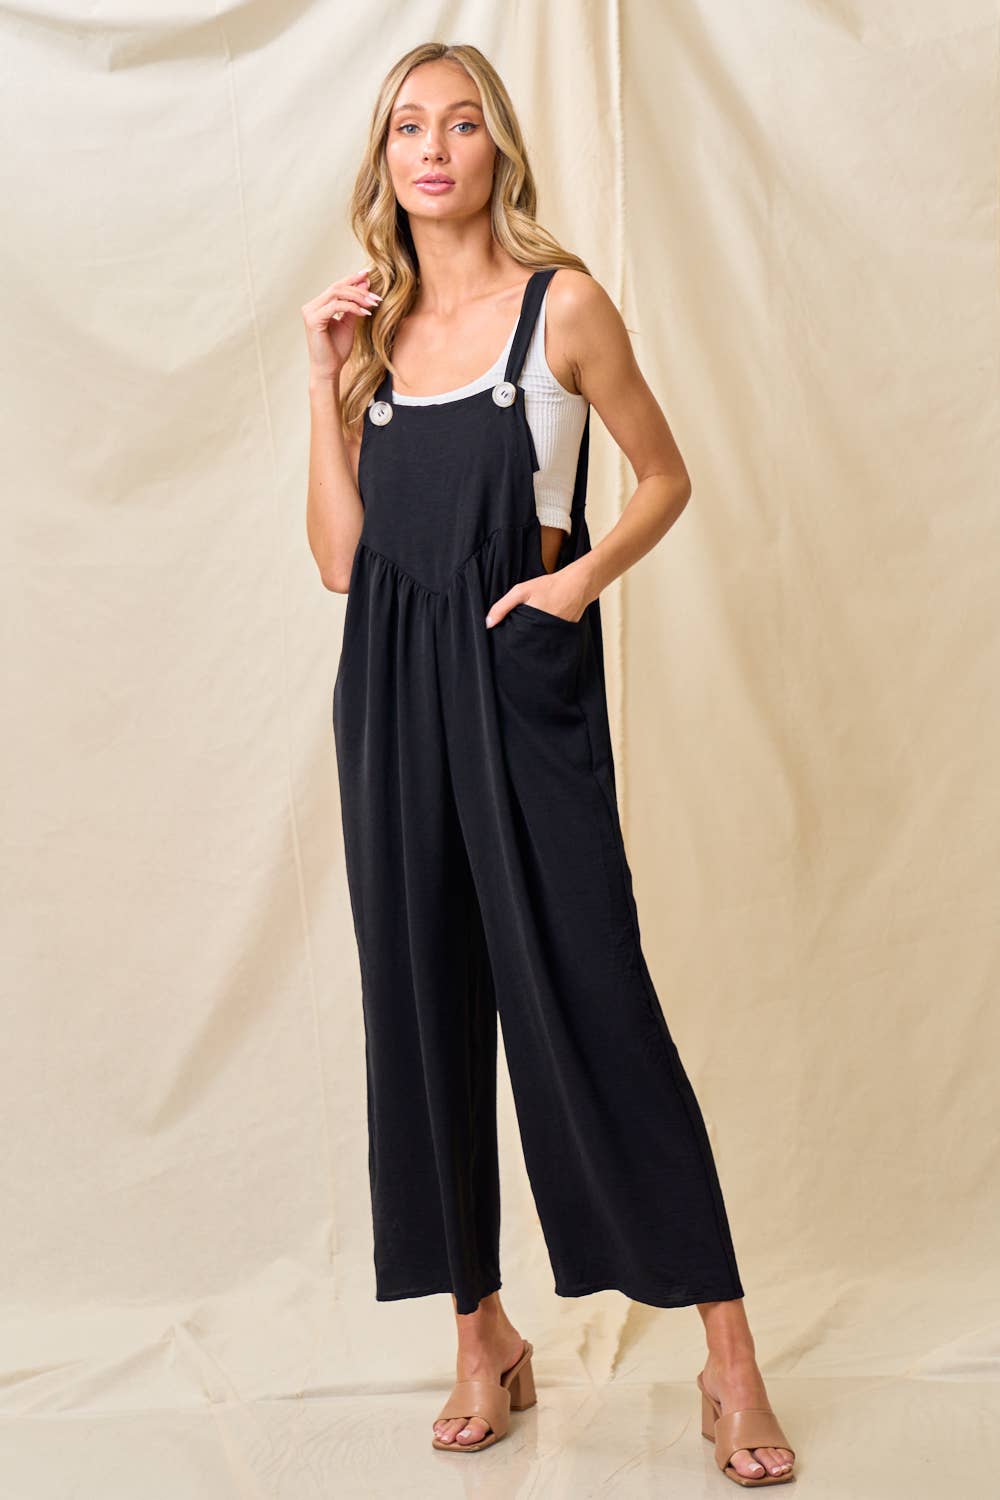 Trying to Stay Calm Black Jumpsuit